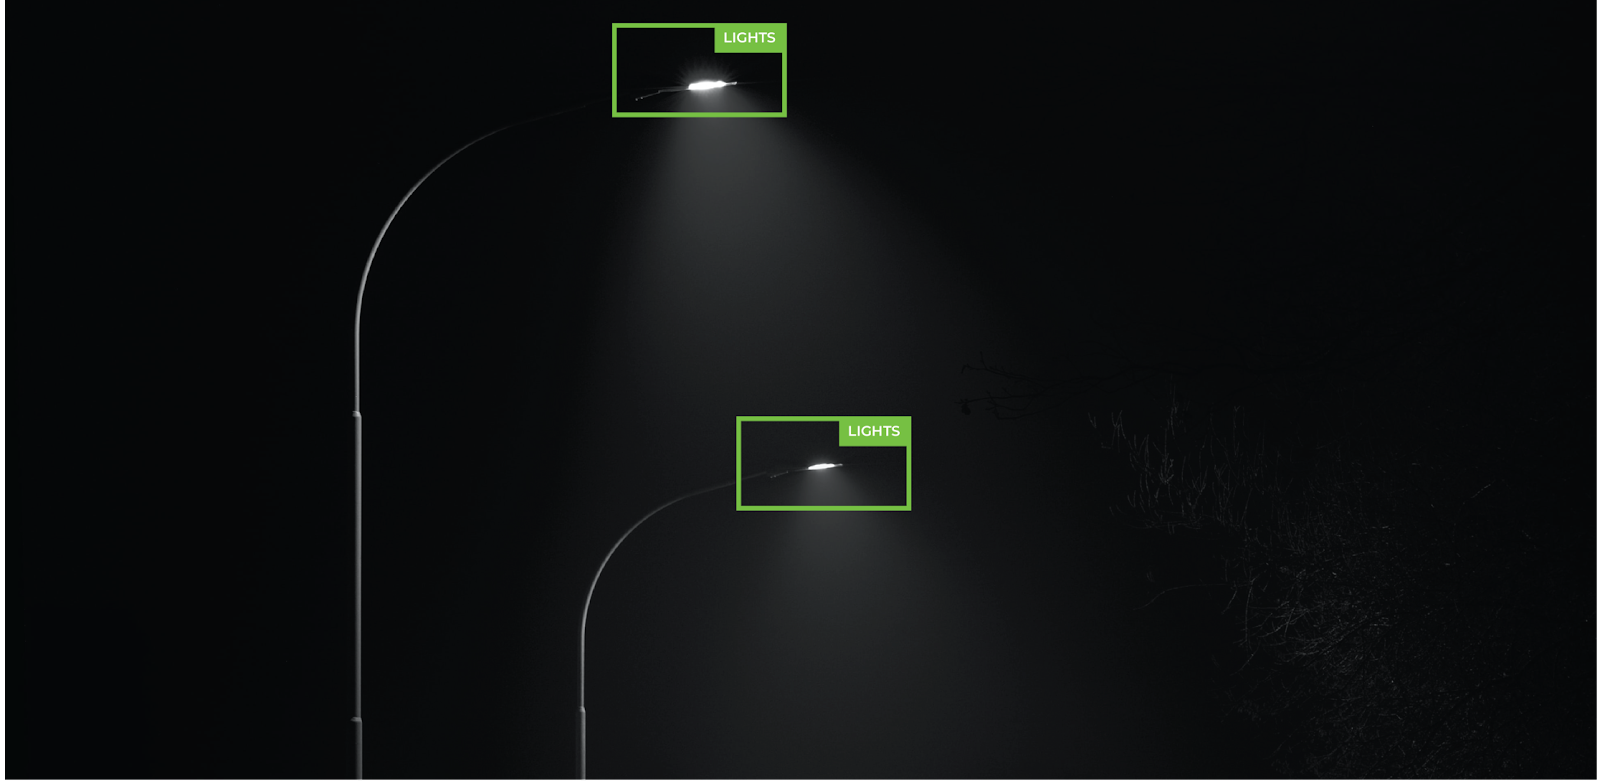 Object detection of two lampposts at night